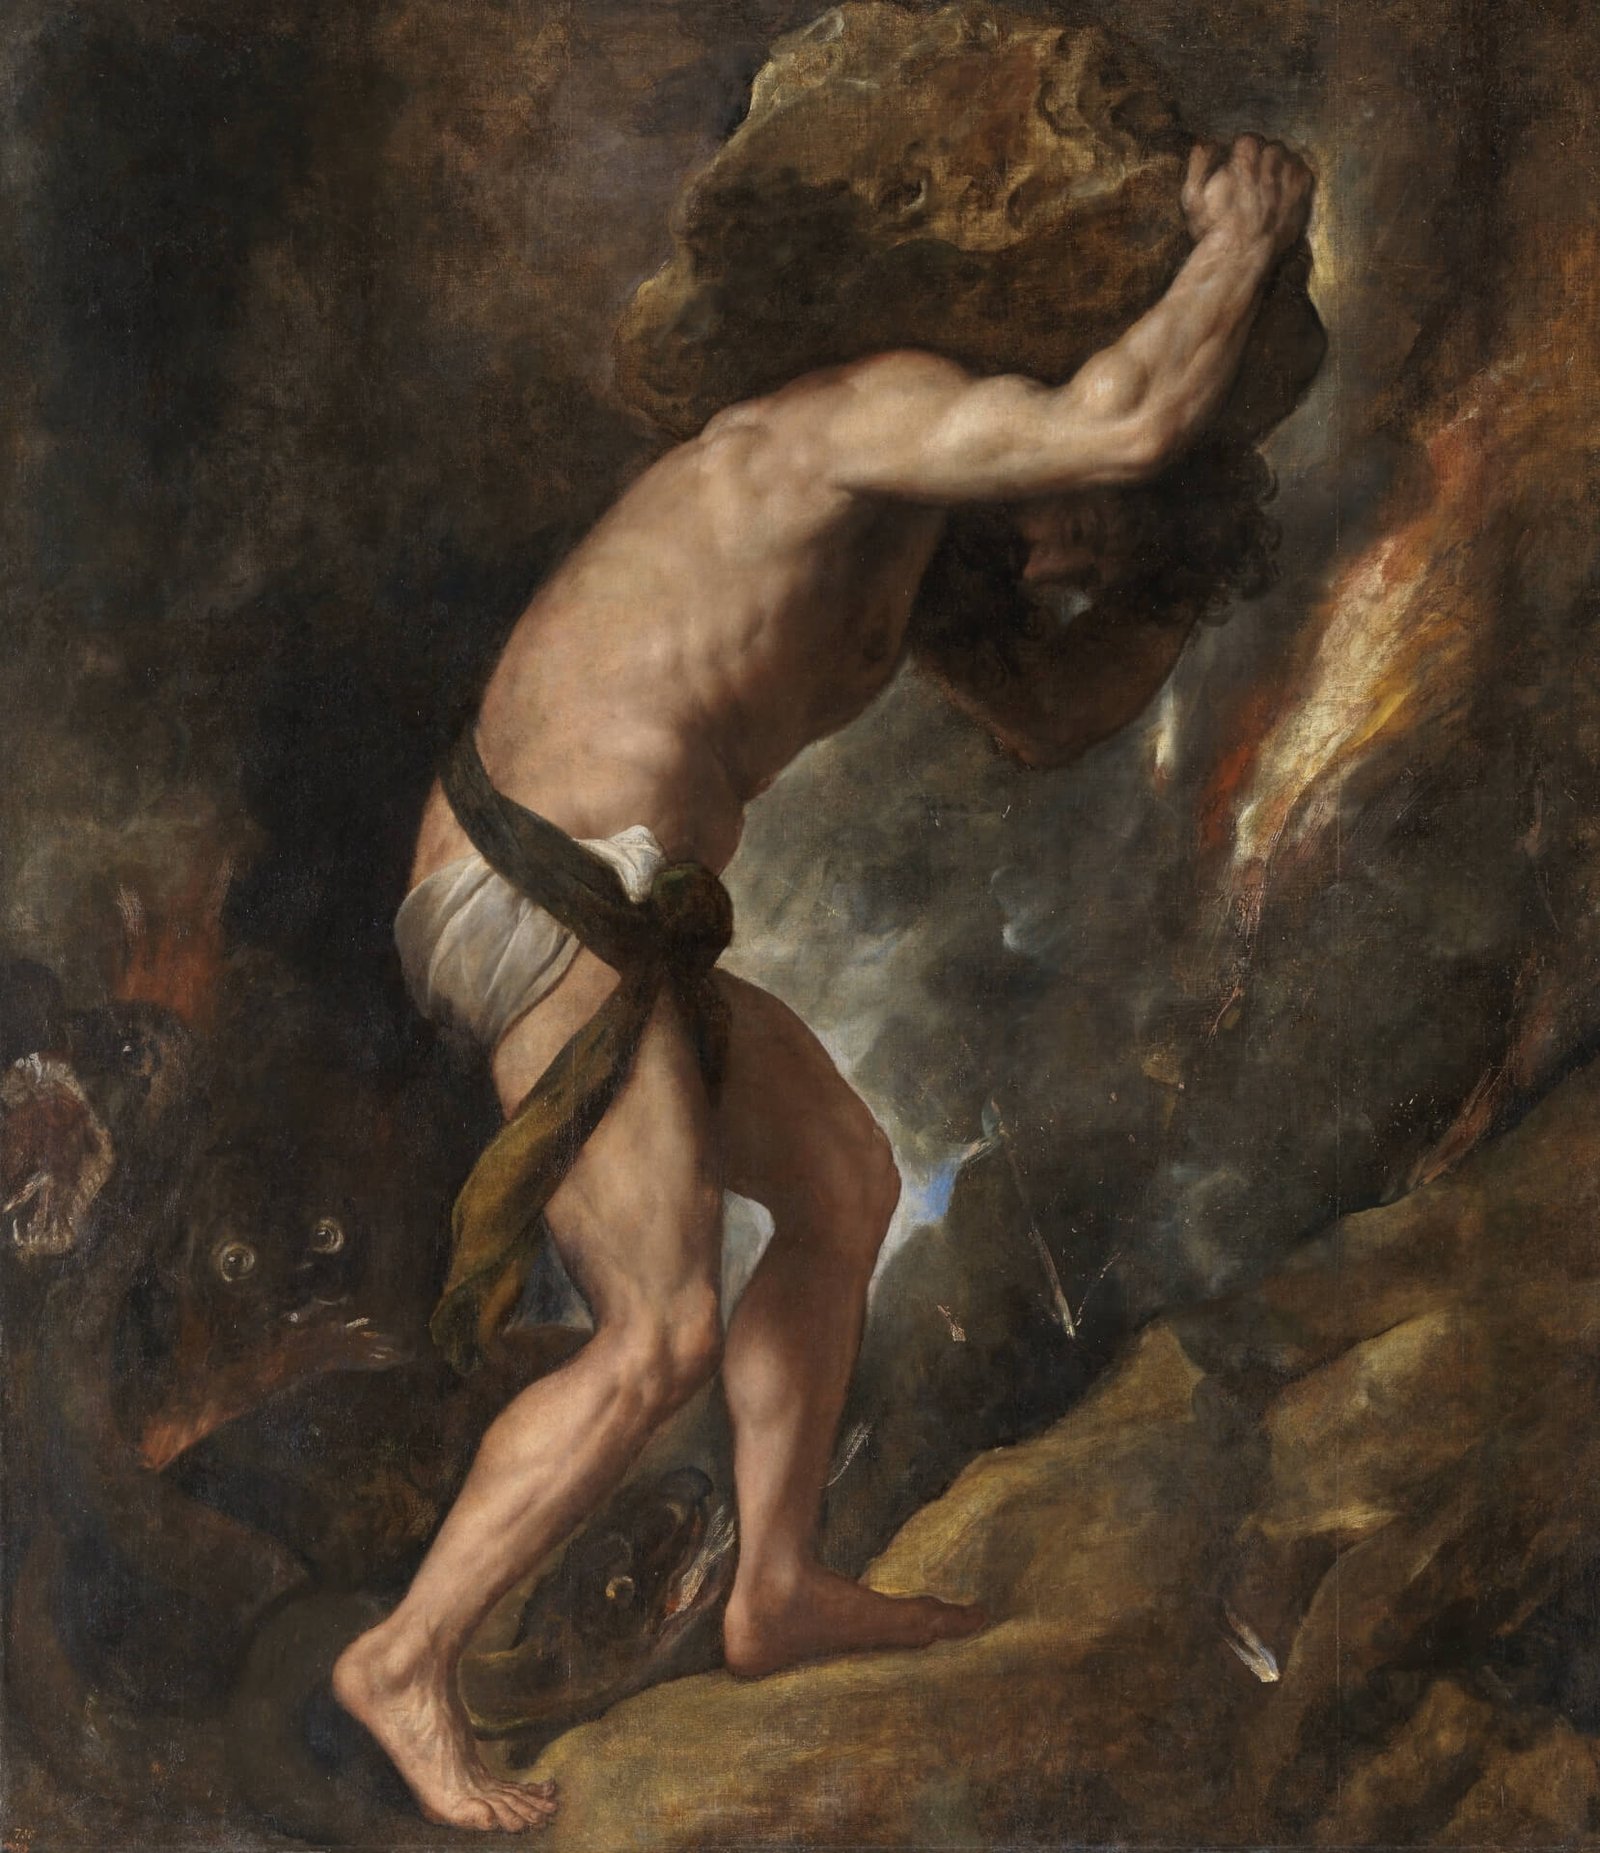 This painting represents Sysyphus as a tired man, carrying a large boulder on his back. It happens in the gloomy realm of Hades.